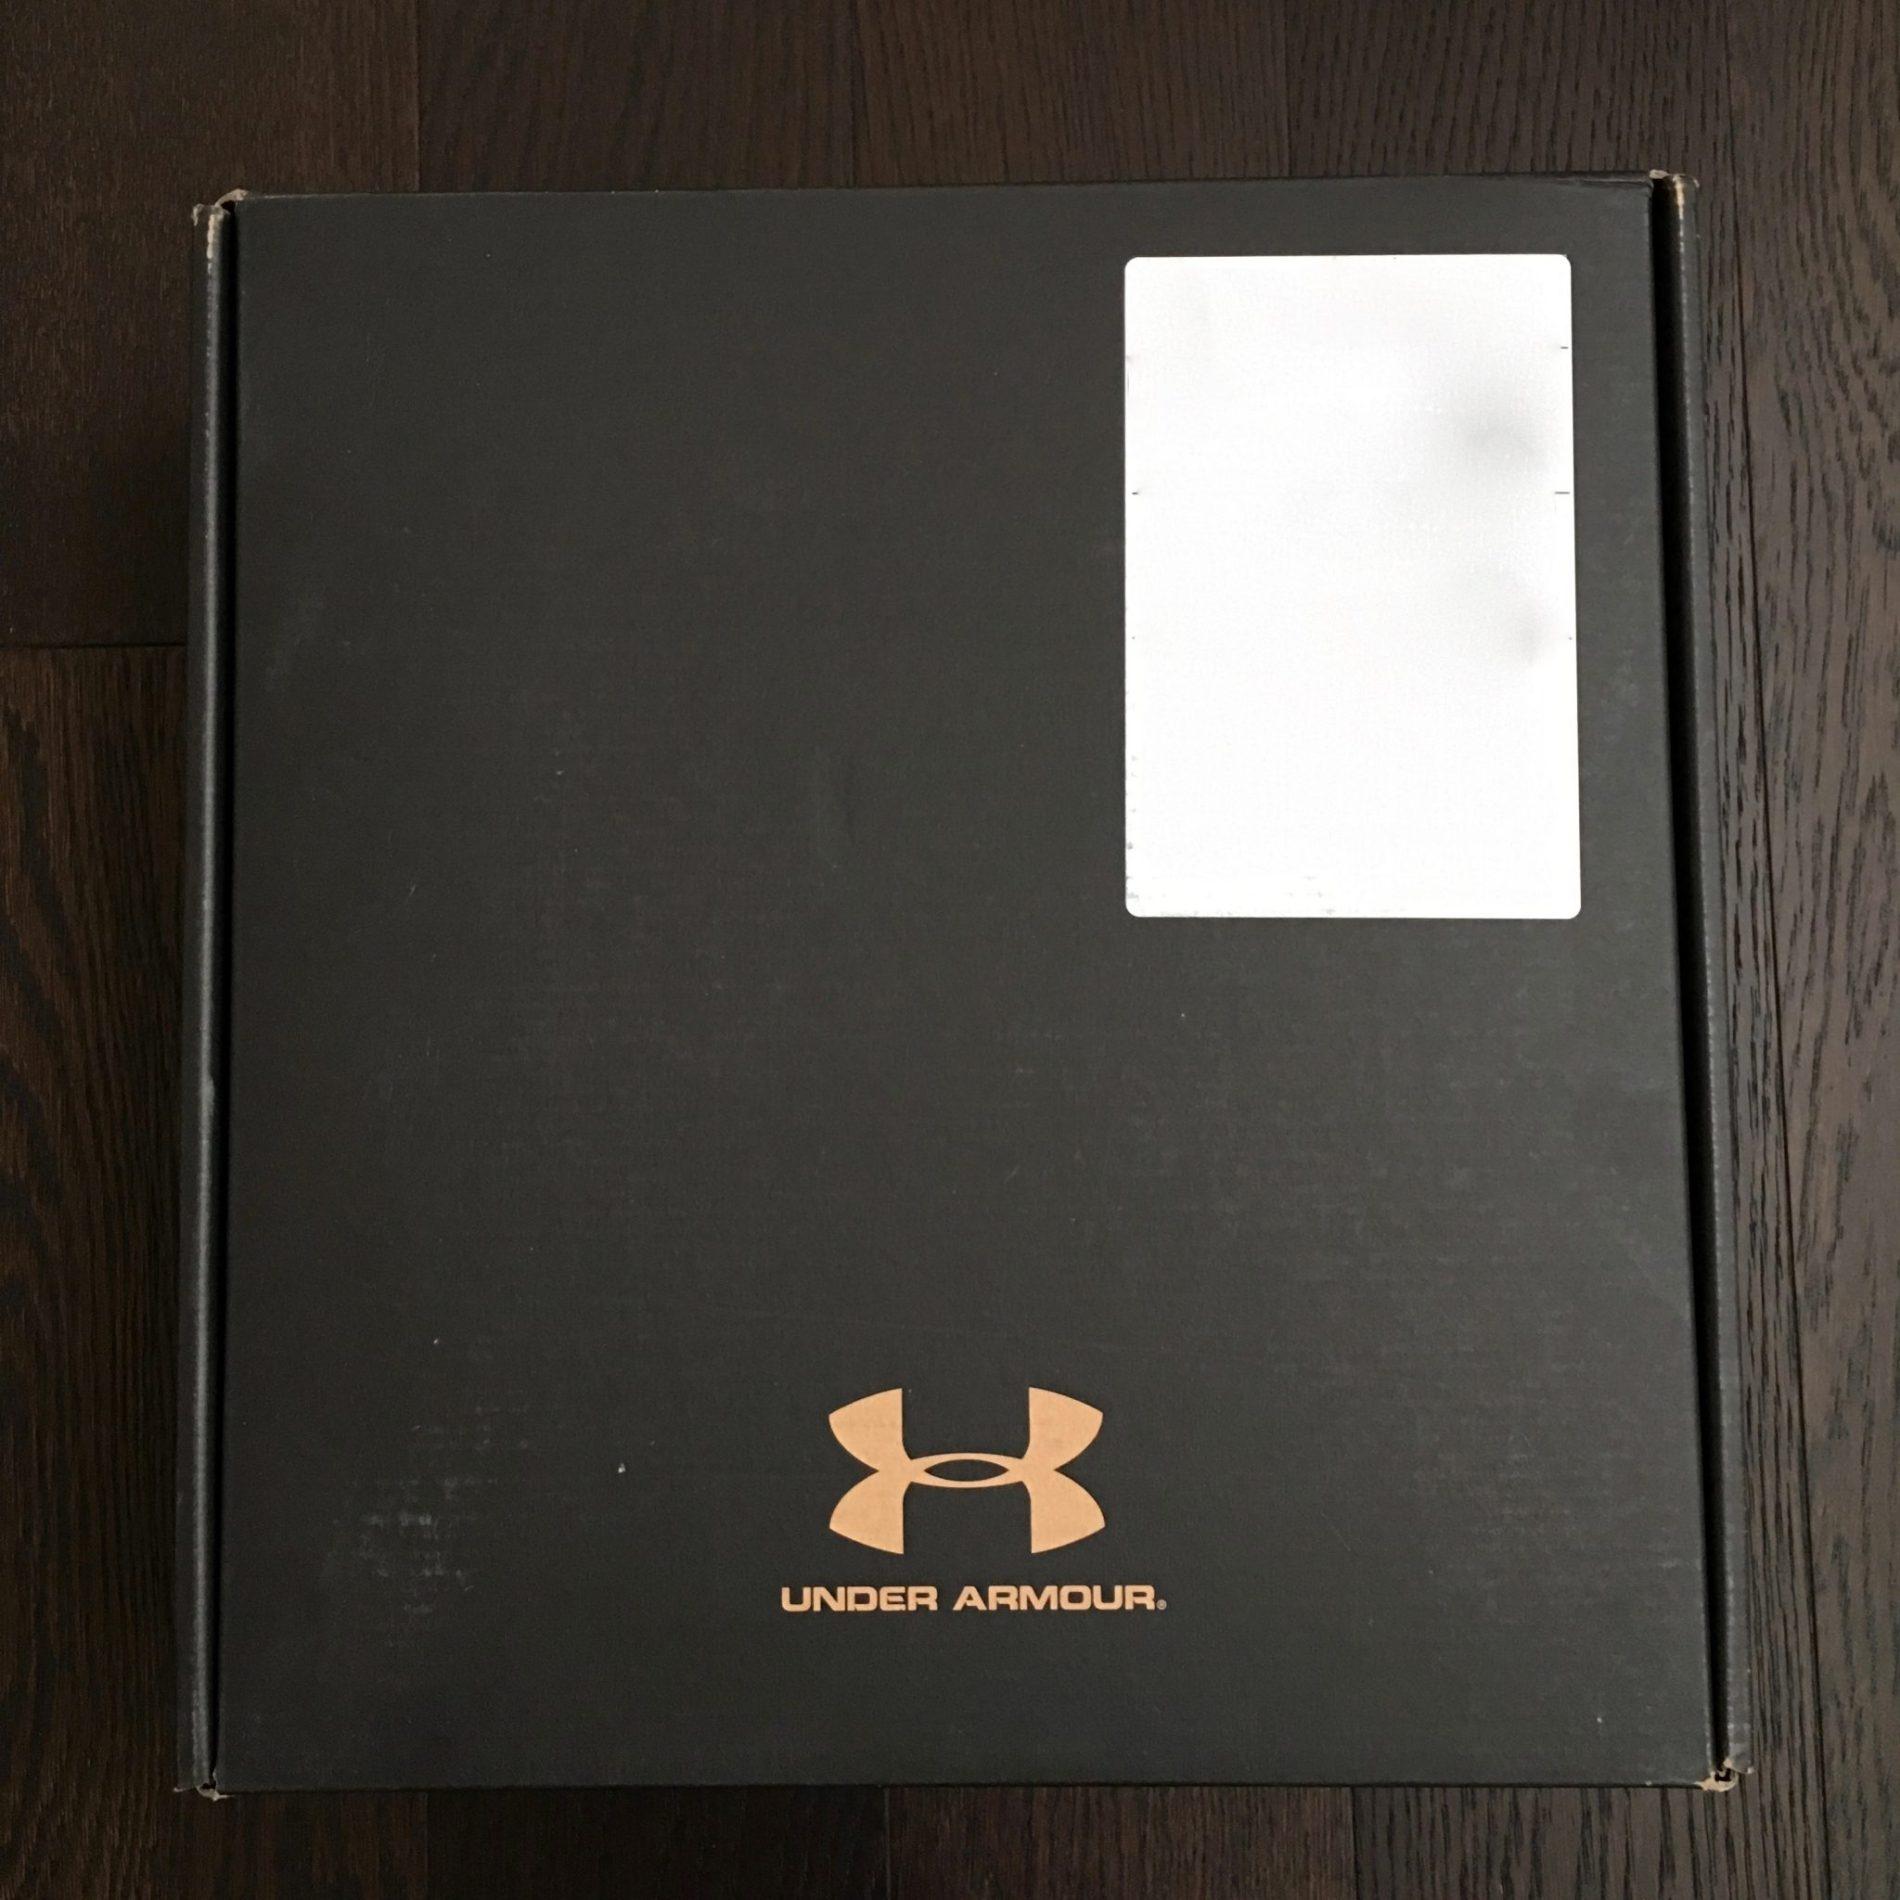 Under Armour ArmourBox Review - January 2018 - Subscription Box Ramblings